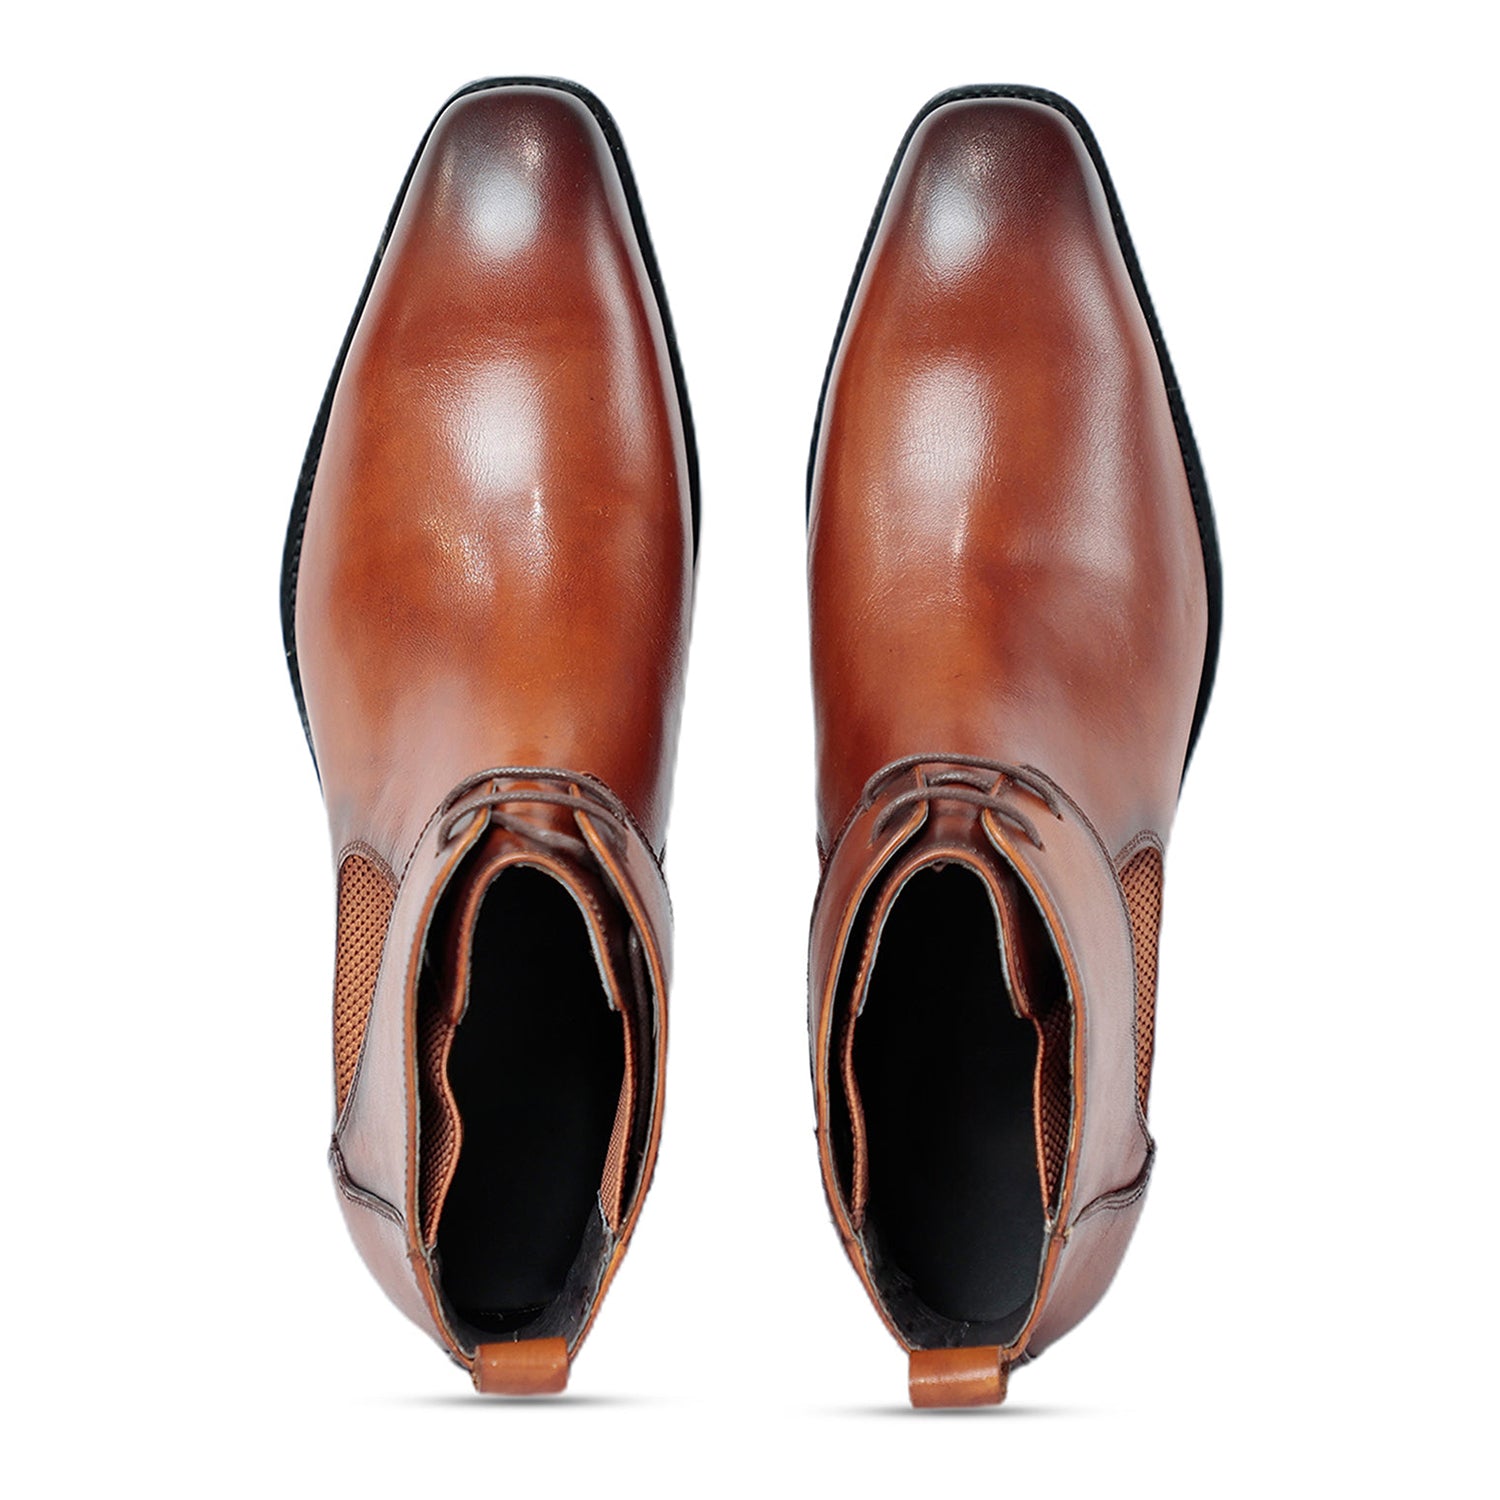 Stanford Chukka Brown Shoes